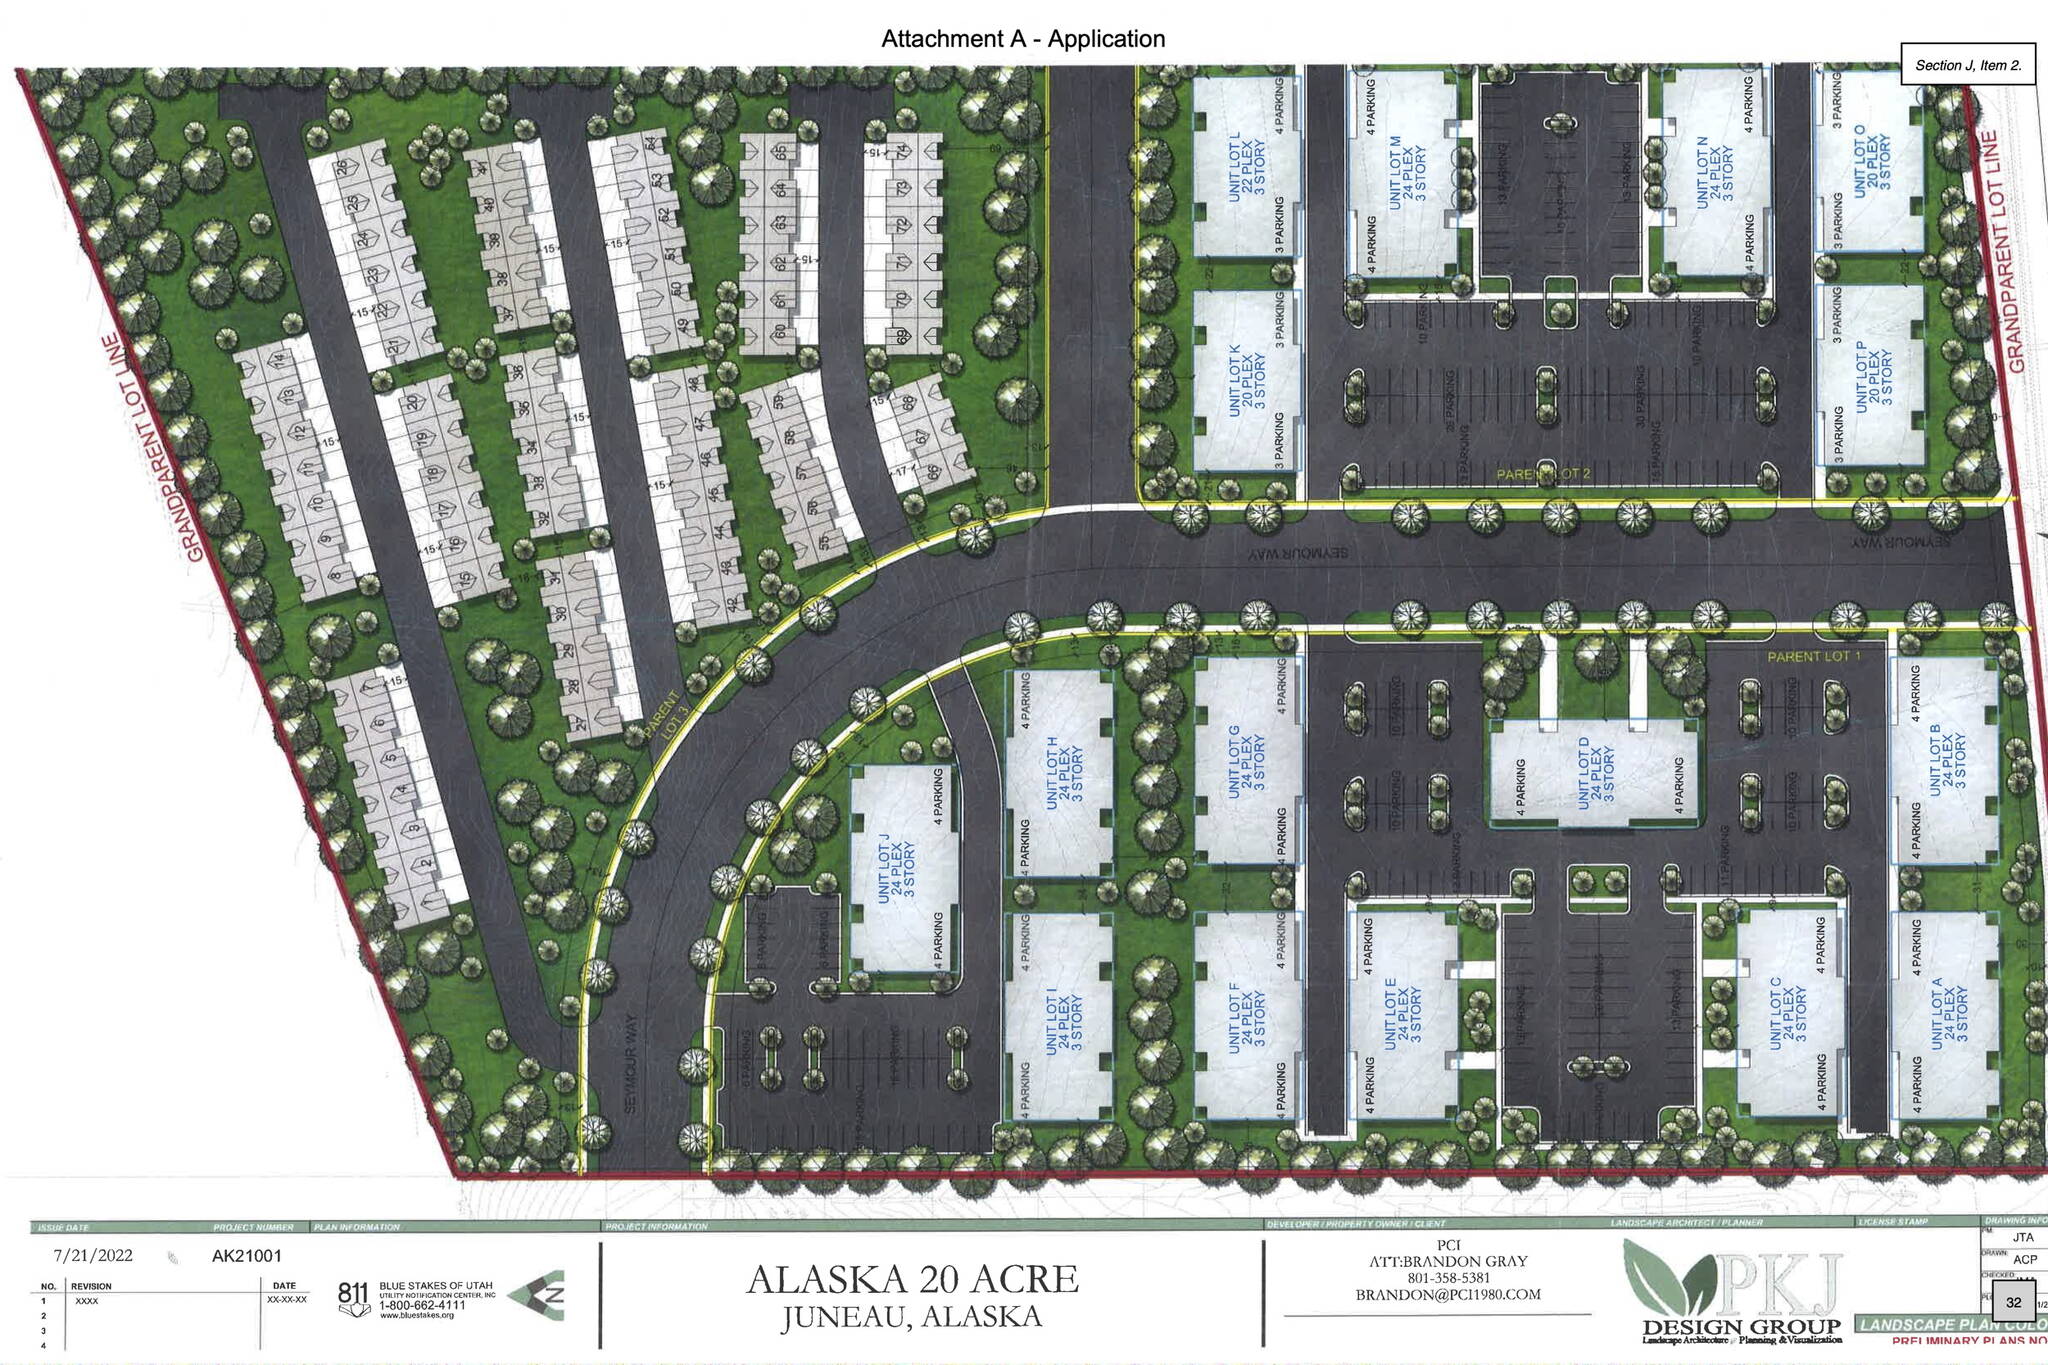 PKJ Design Group 
An illustration shows a proposed residential development at 7400 Glacier Highway would have about 30 multi-unit buildings if fully implemented, including 370 apartments and 74 townhouses.